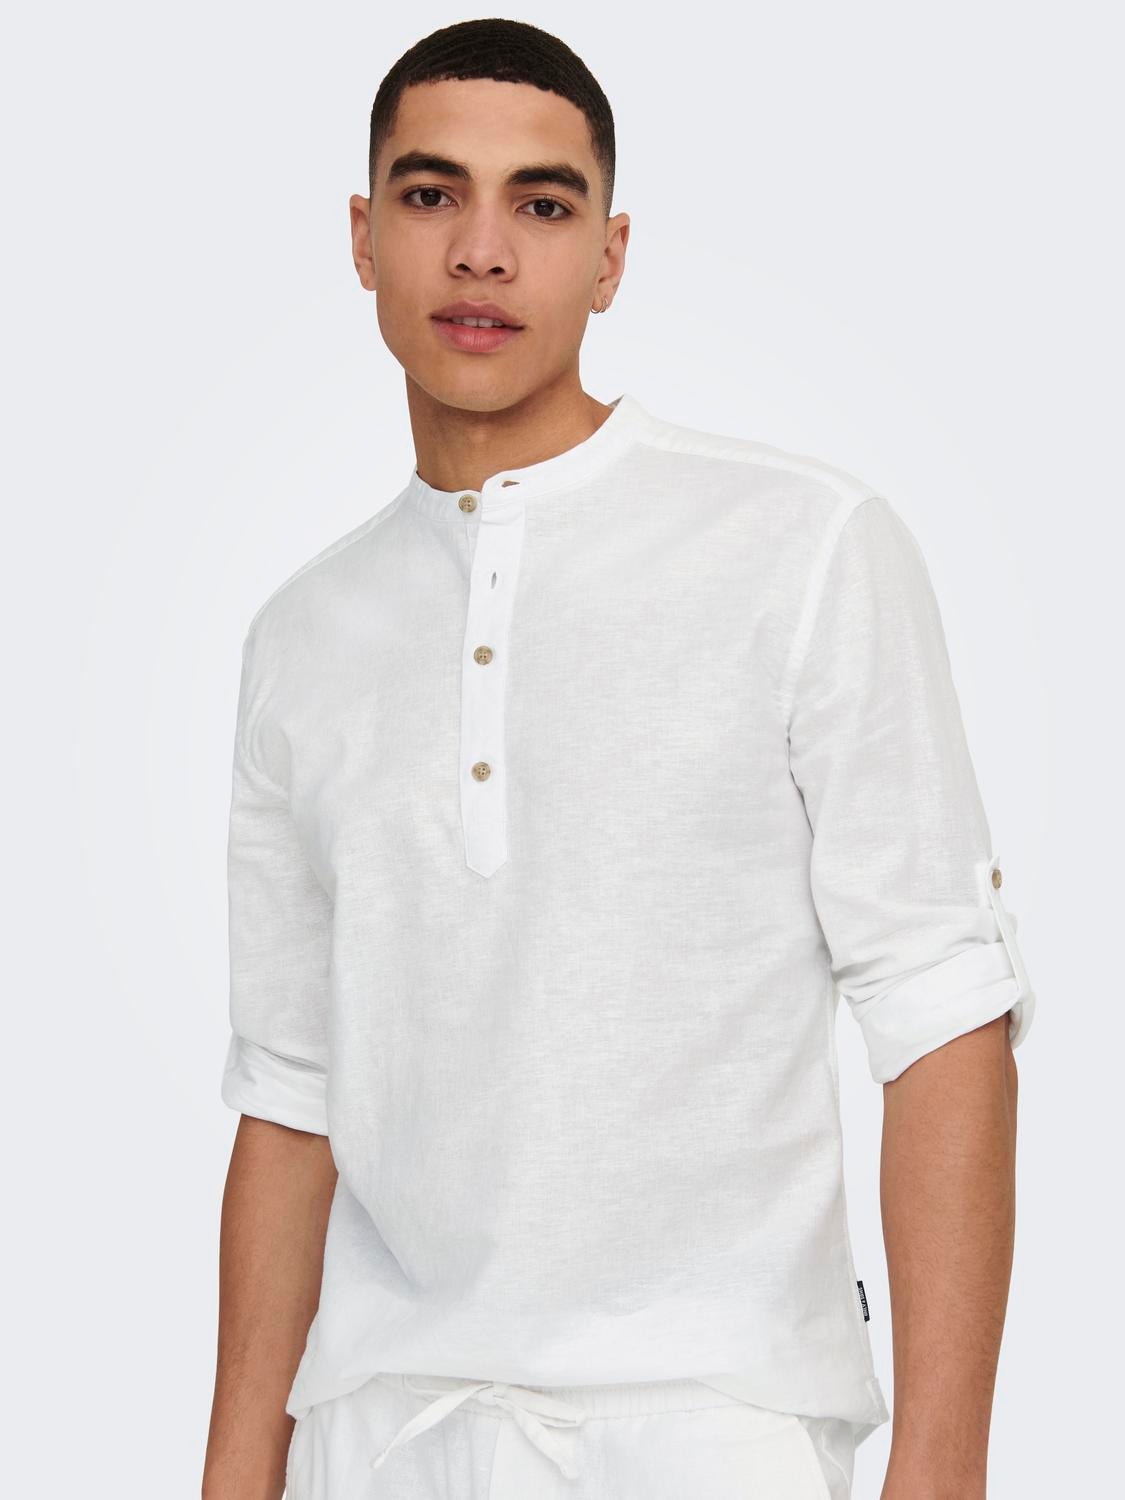 ONLY & SONS Slim Fit China Collar Shirt -White - 22009883